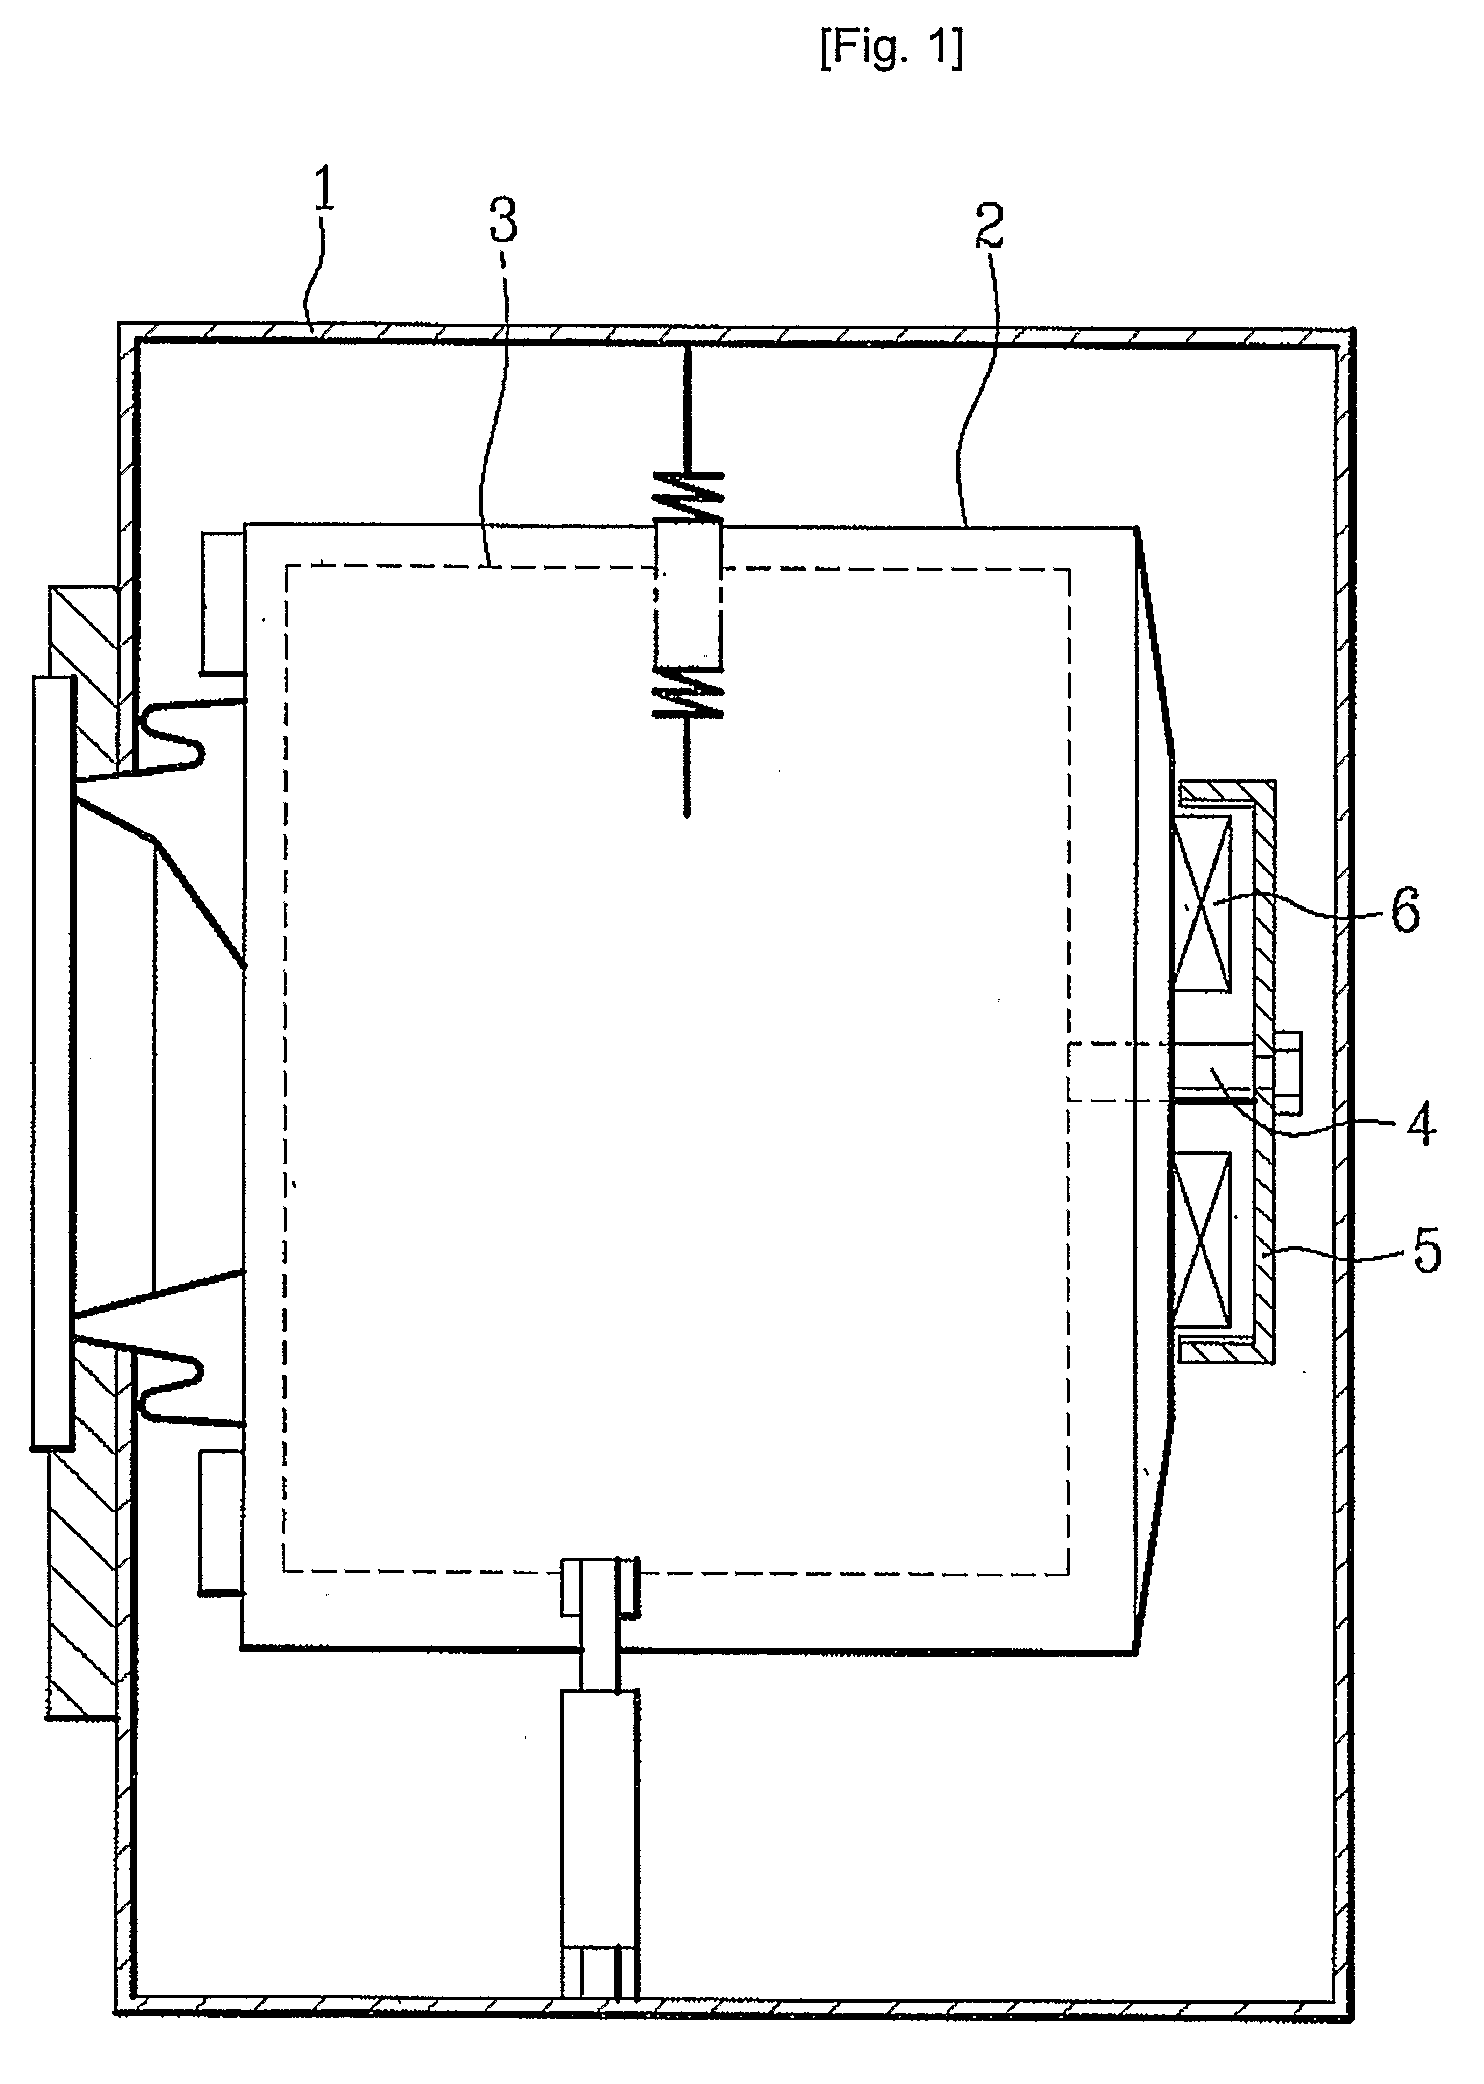 Tub for a washing machine with a bearing housing inserted therein